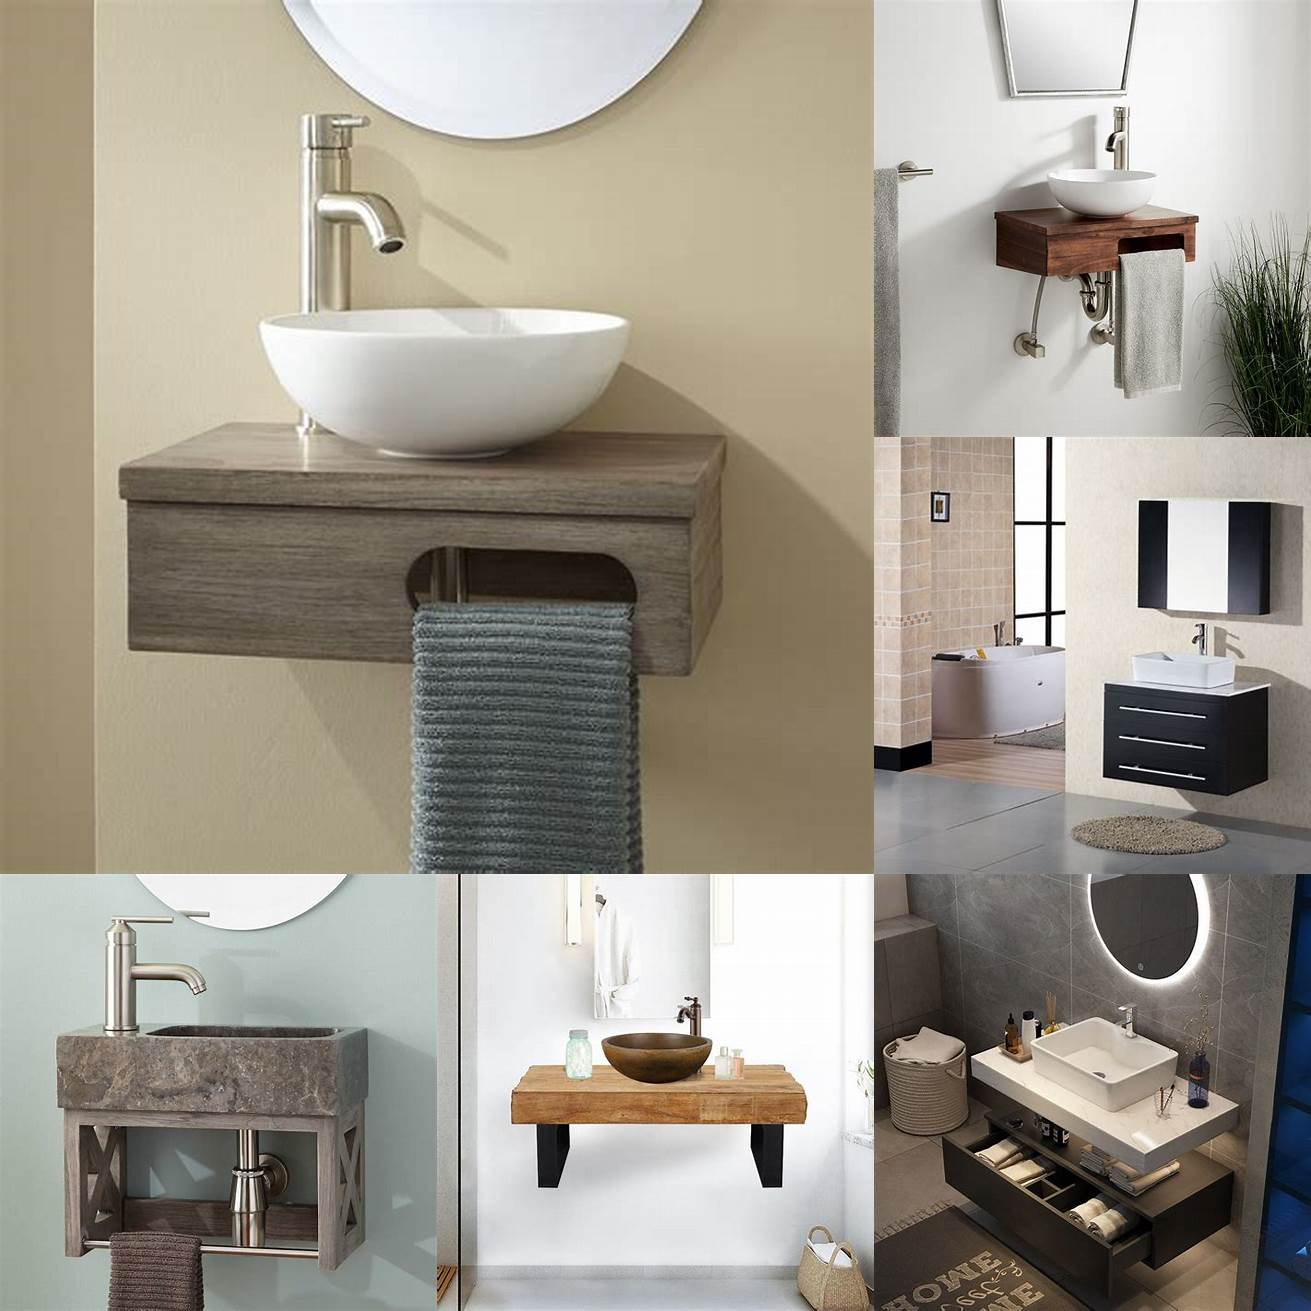 A wall-mounted vanity with a vessel sink